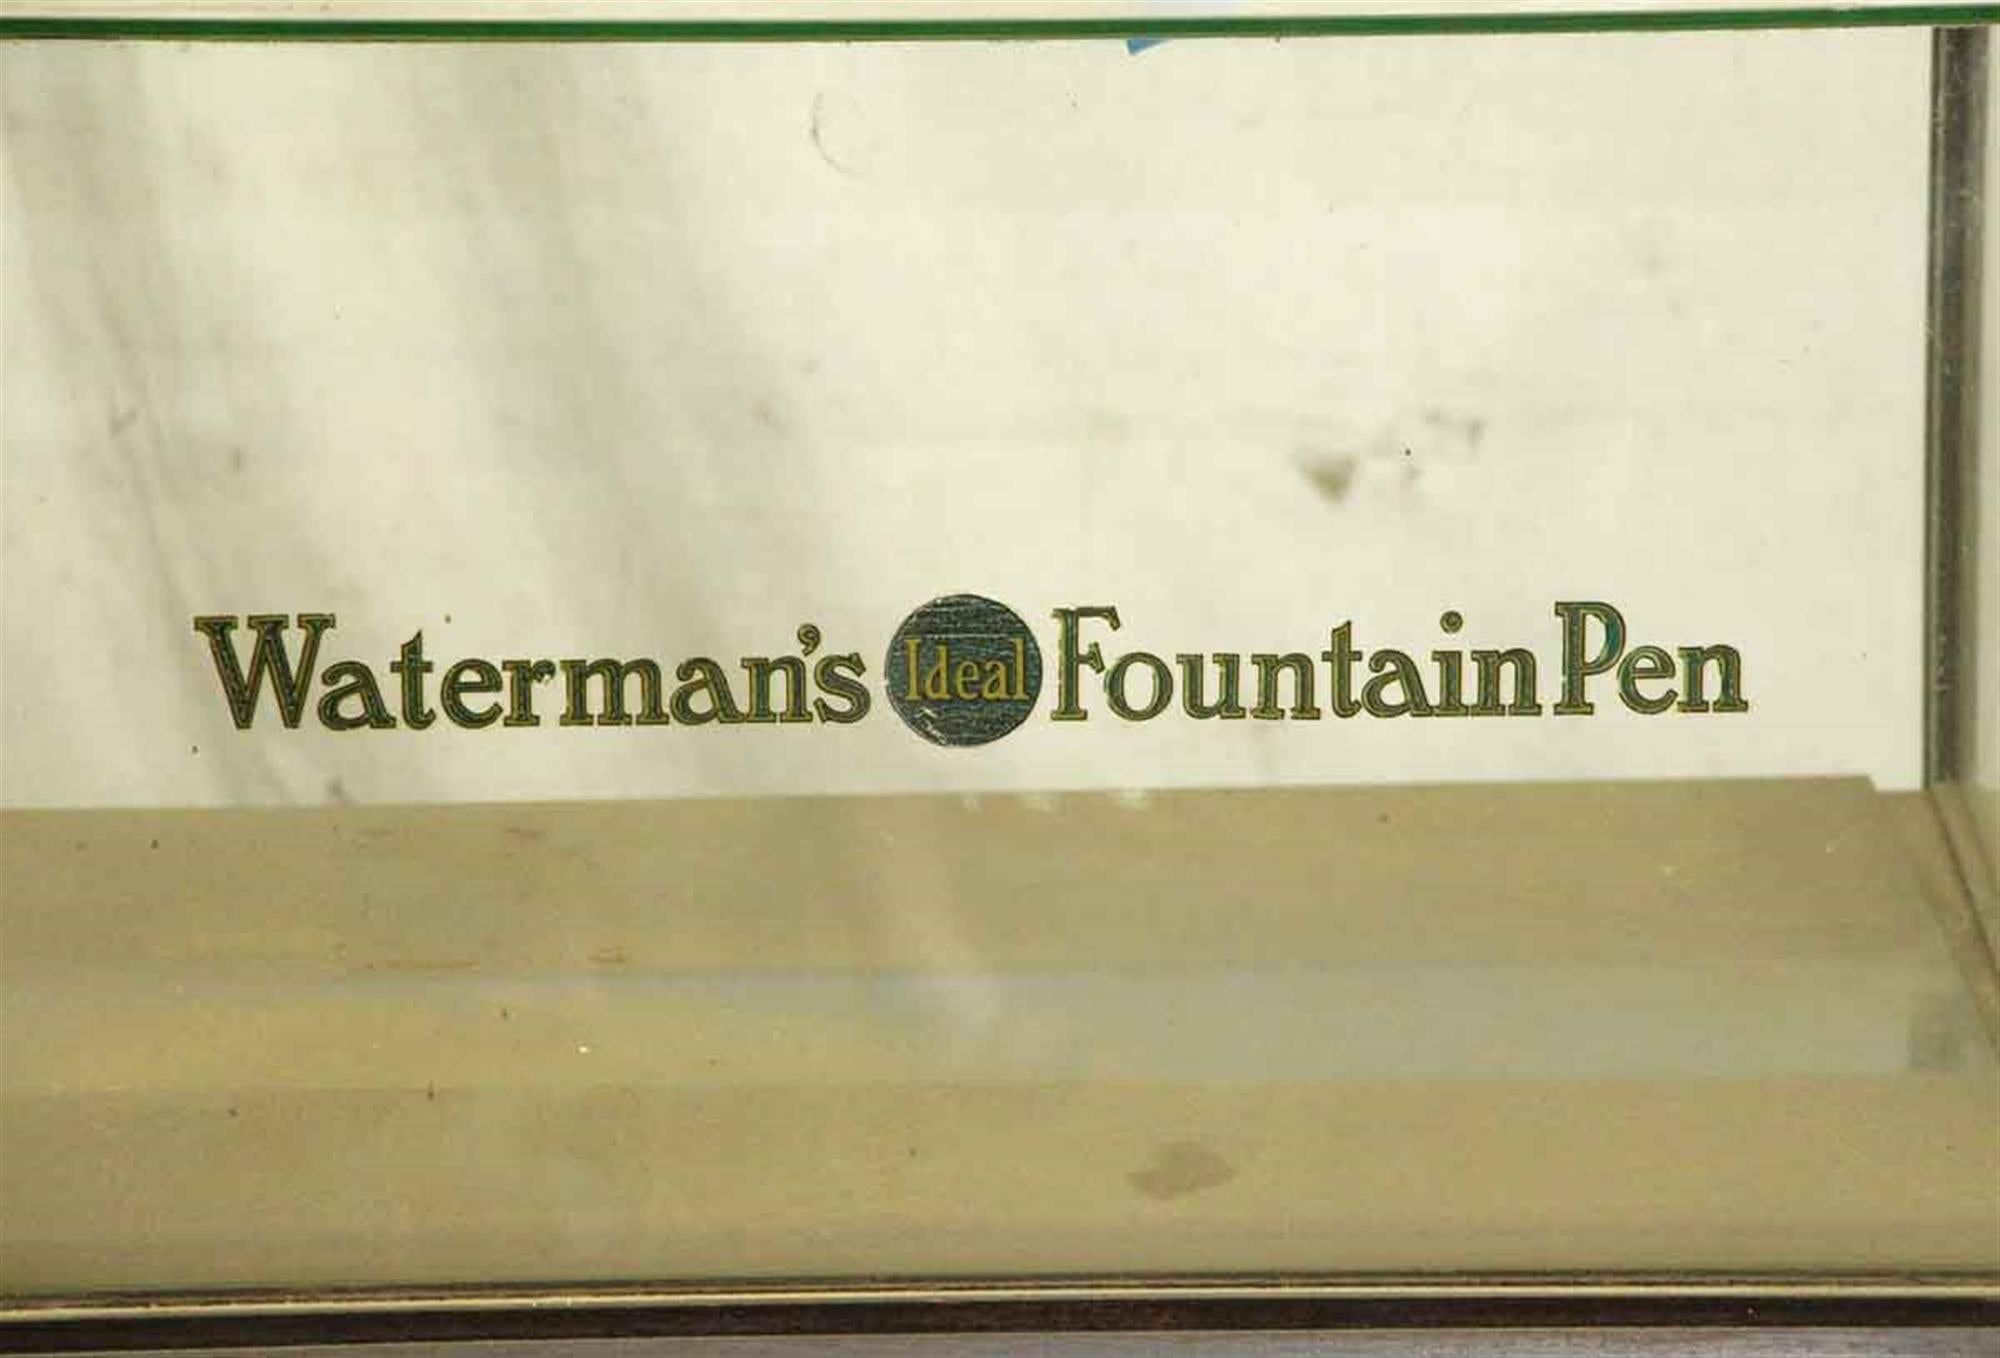 1920s original Waterman's ideal fountain pen wood and glass showcase with original lettering on both the glass and the wood. This needs cleaning up, but is in overall good condition. This can be seen at our 400 Gilligan St location in Scranton, PA.